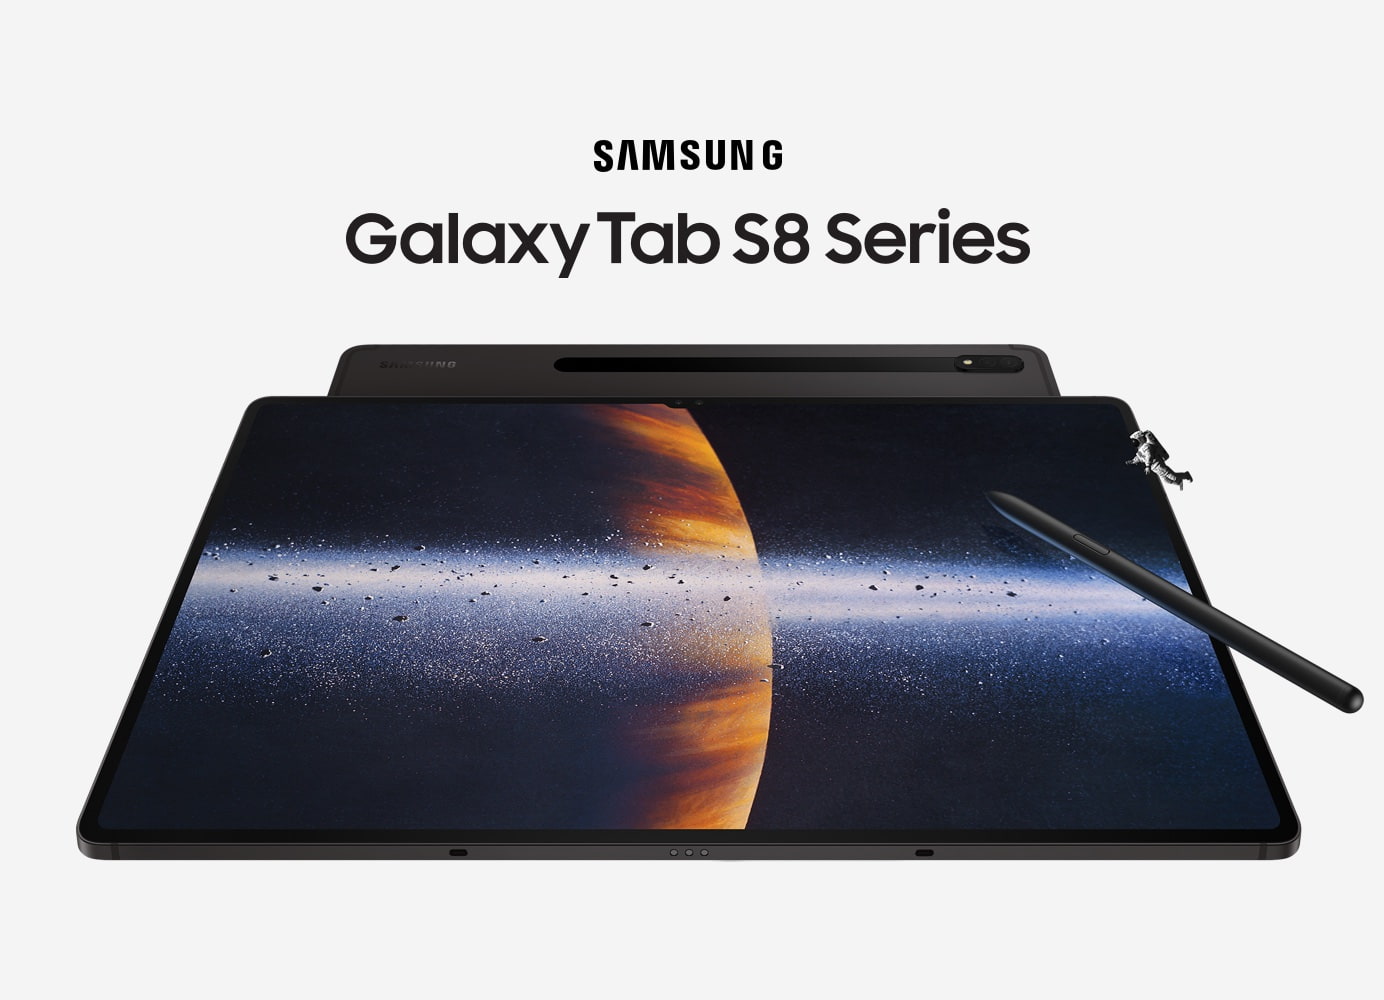 The Samsung Galaxy Tab S8 with S Pen 